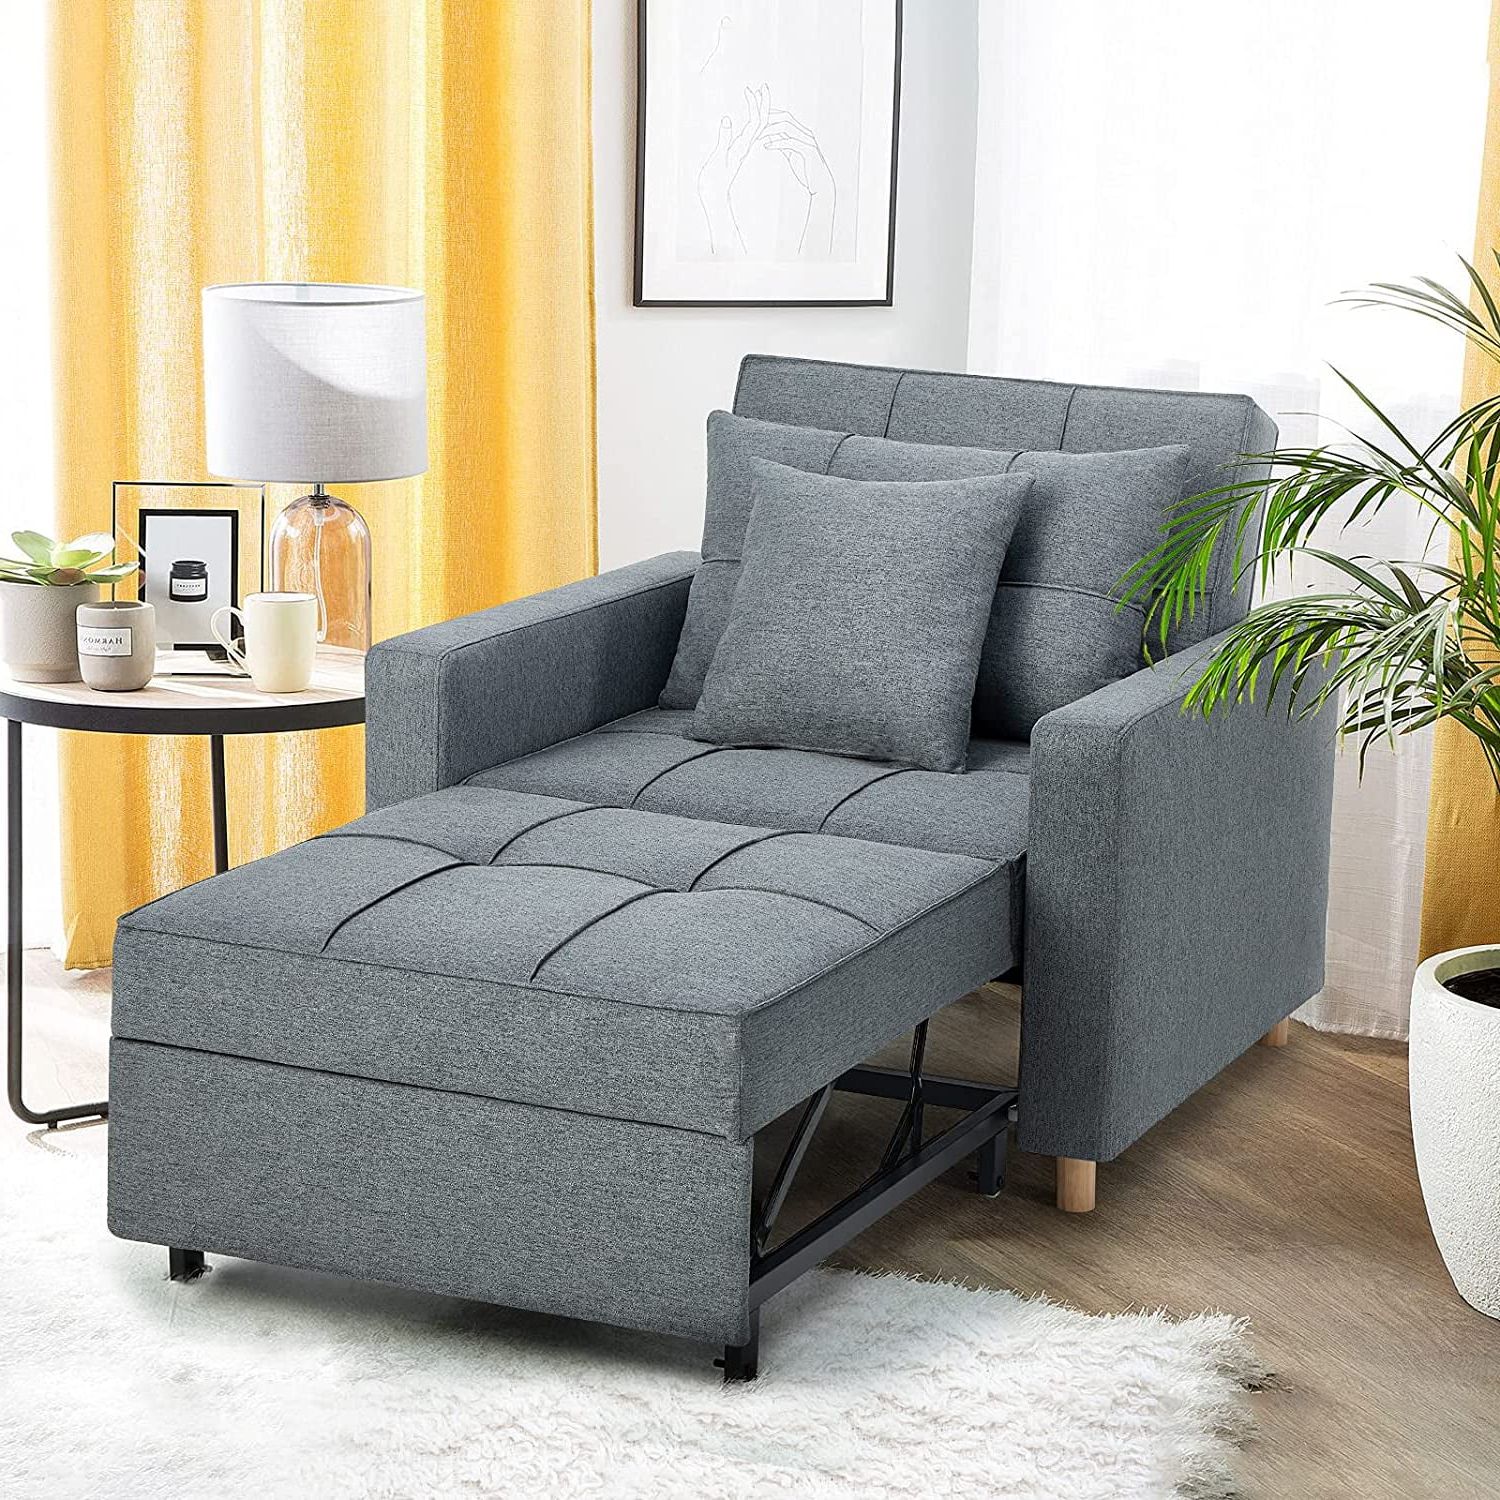 Buy Yodolla 3 In 1 Futon Sofa Bed Chair,convertible Sofa Sleeper Dark Inside 3 In 1 Gray Pull Out Sleeper Sofas (View 4 of 20)